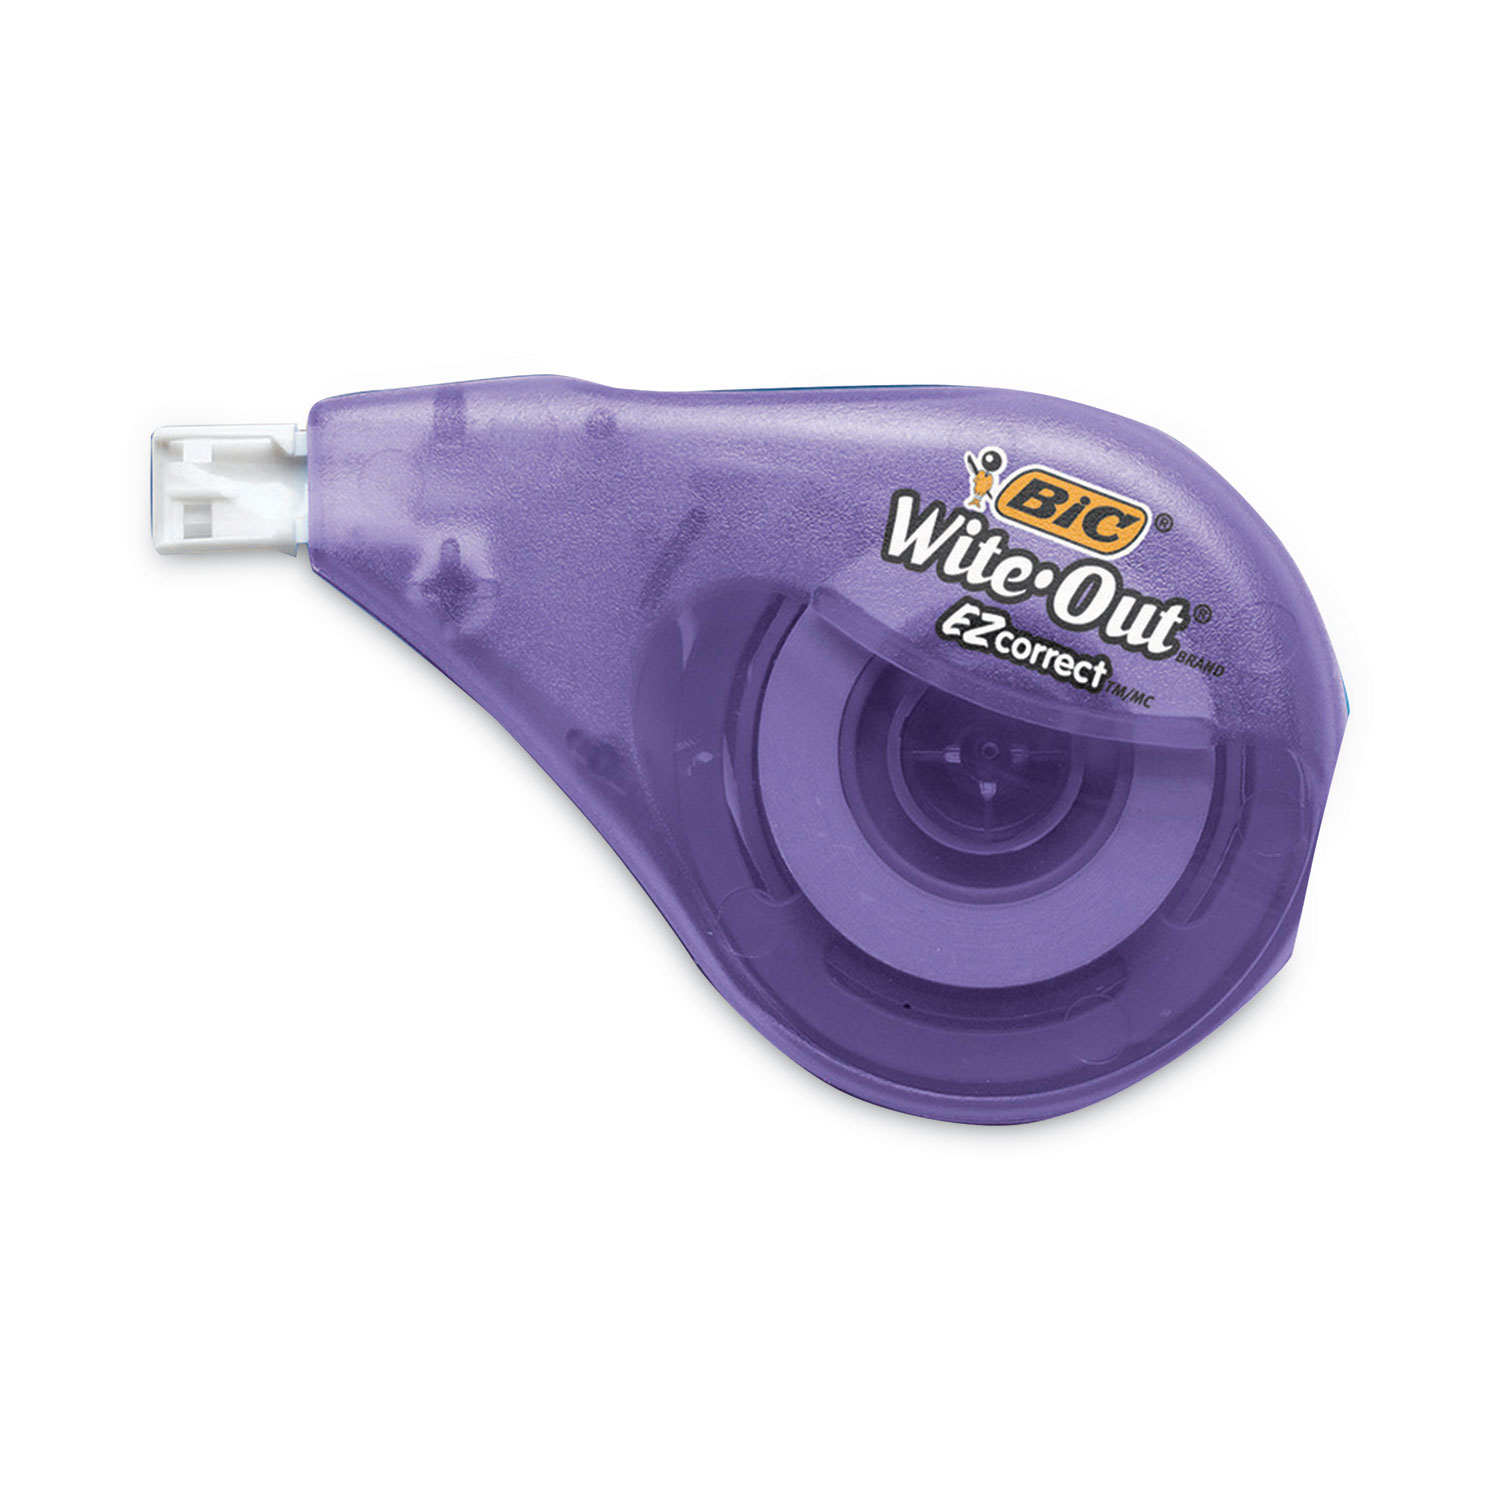 Wite-Out EZ Correct Correction Tape, Non-Refillable, Randomly Assorted  Applicator Colors, 0.17 x 400, 4/Pack - BOSS Office and Computer Products